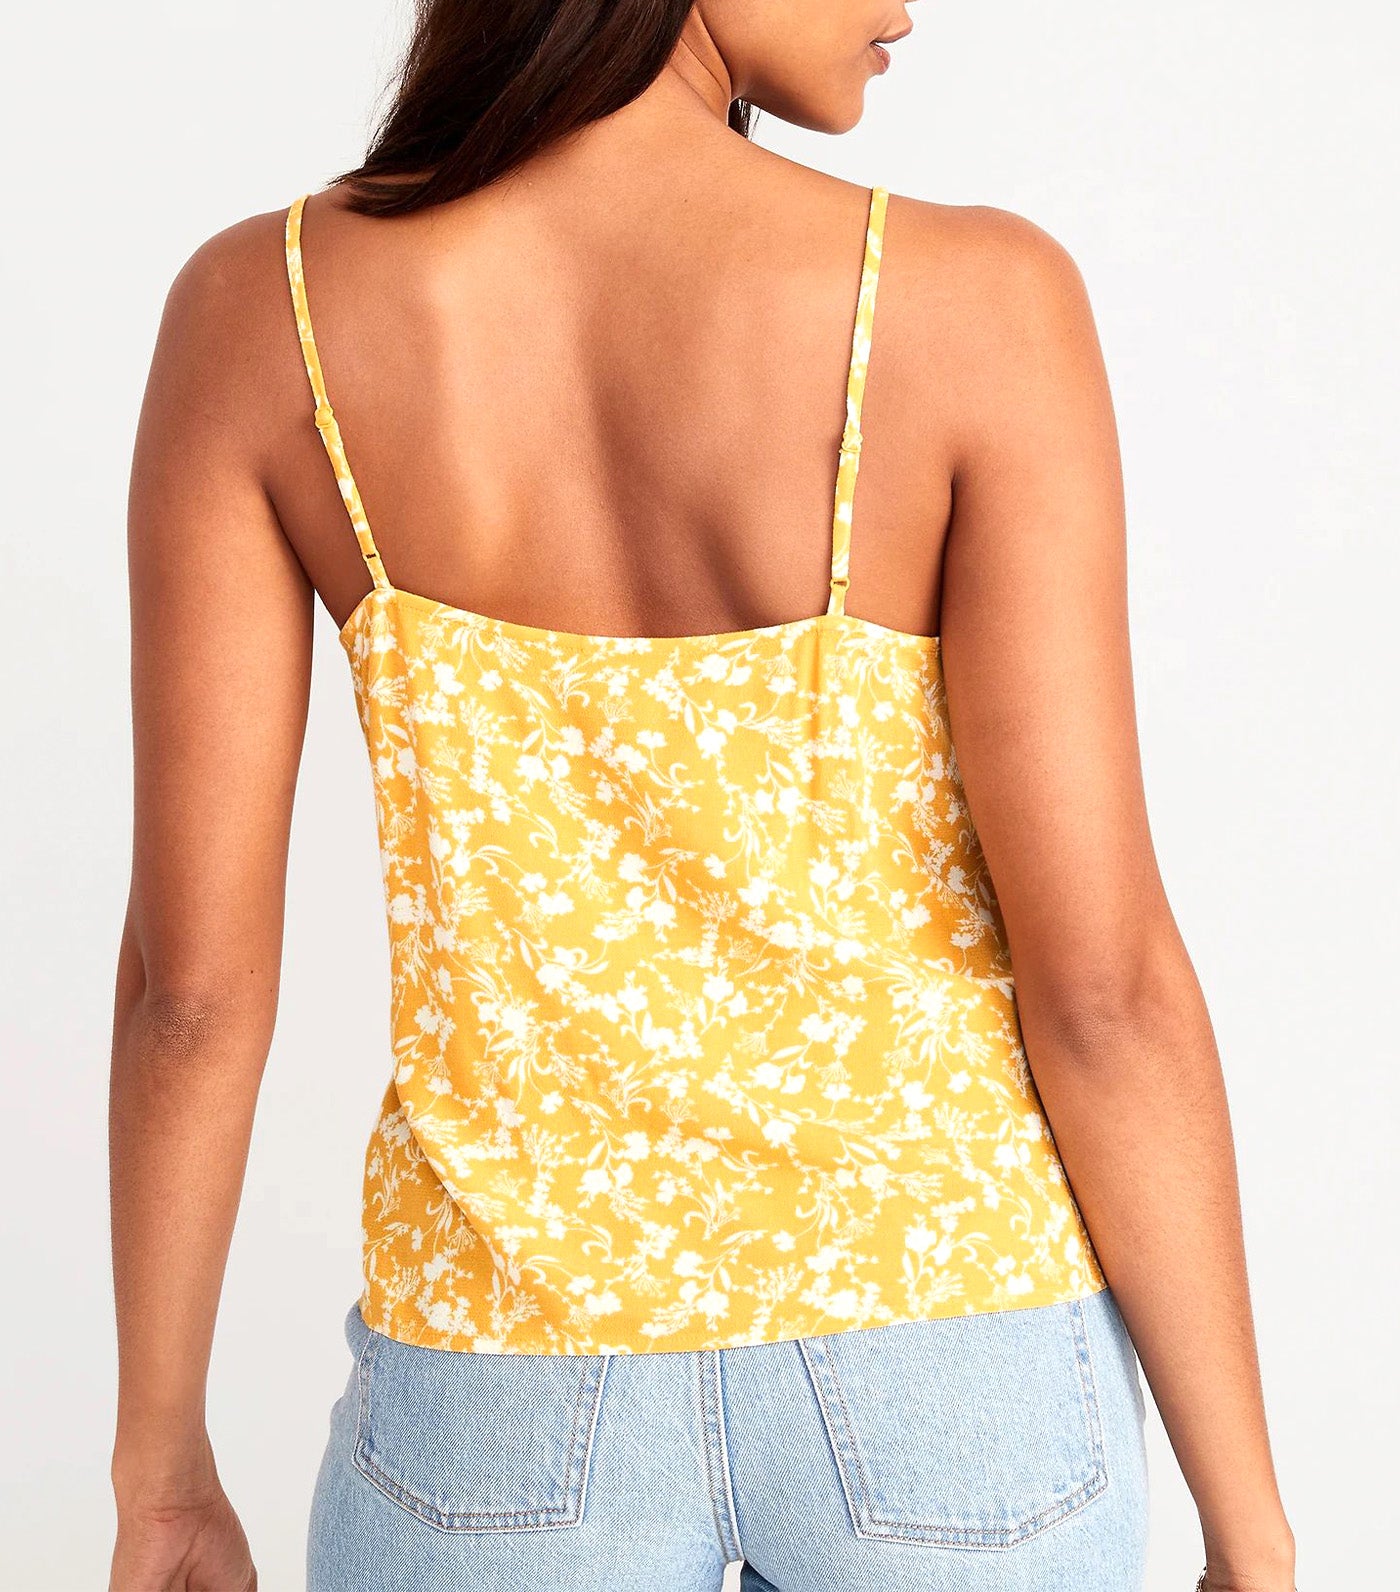 Textured Ruffled Wrap-Effect Cami Top for Women Yellow Floral